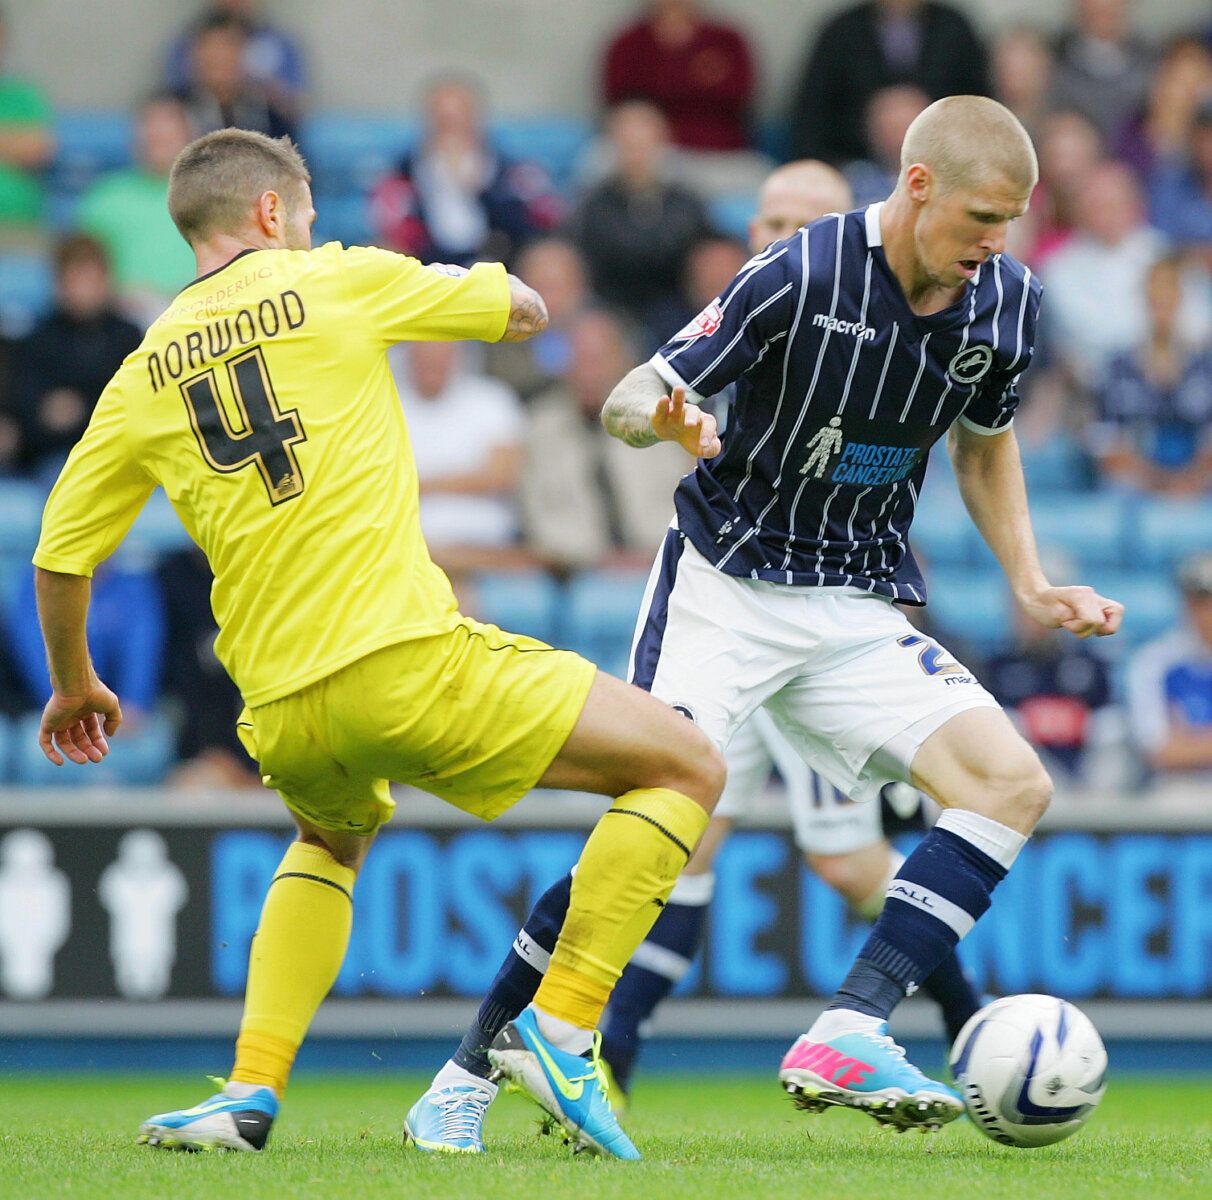 Football - Millwall v Huddersfield Town - Sky Bet Football League Championship - The New Den - 17/8/13 
Millwall's Andy Keogh (R) and Huddersfield's Oliver Norwood in action 
Mandatory Credit: Action Images / David Field 
Livepic 
EDITORIAL USE ONLY. No use with unauthorized audio, video, data, fixture lists, club/league logos or live services. Online in-match use limited to 45 images, no video emulation. No use in betting, games or single club/league/player publications.  Please contact your ac